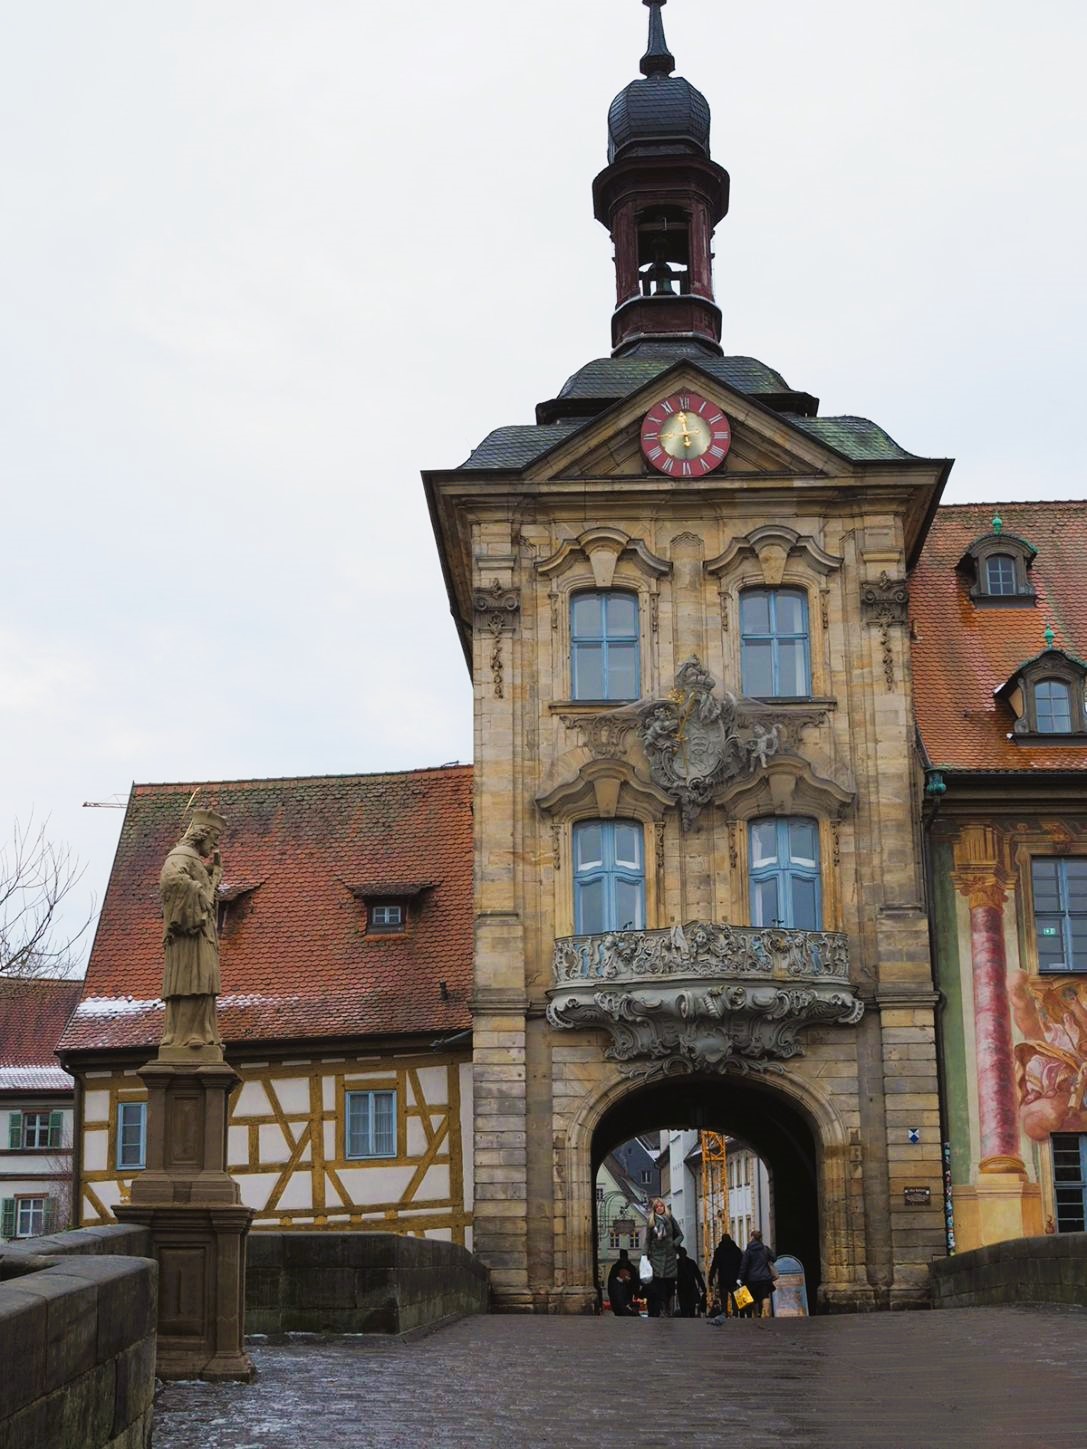 A tan statue of a religious figure stands before the Gothic Altes Rathaus, find out all about this lovely building on the ultimate walking tour & map of Bamberg, Germany.